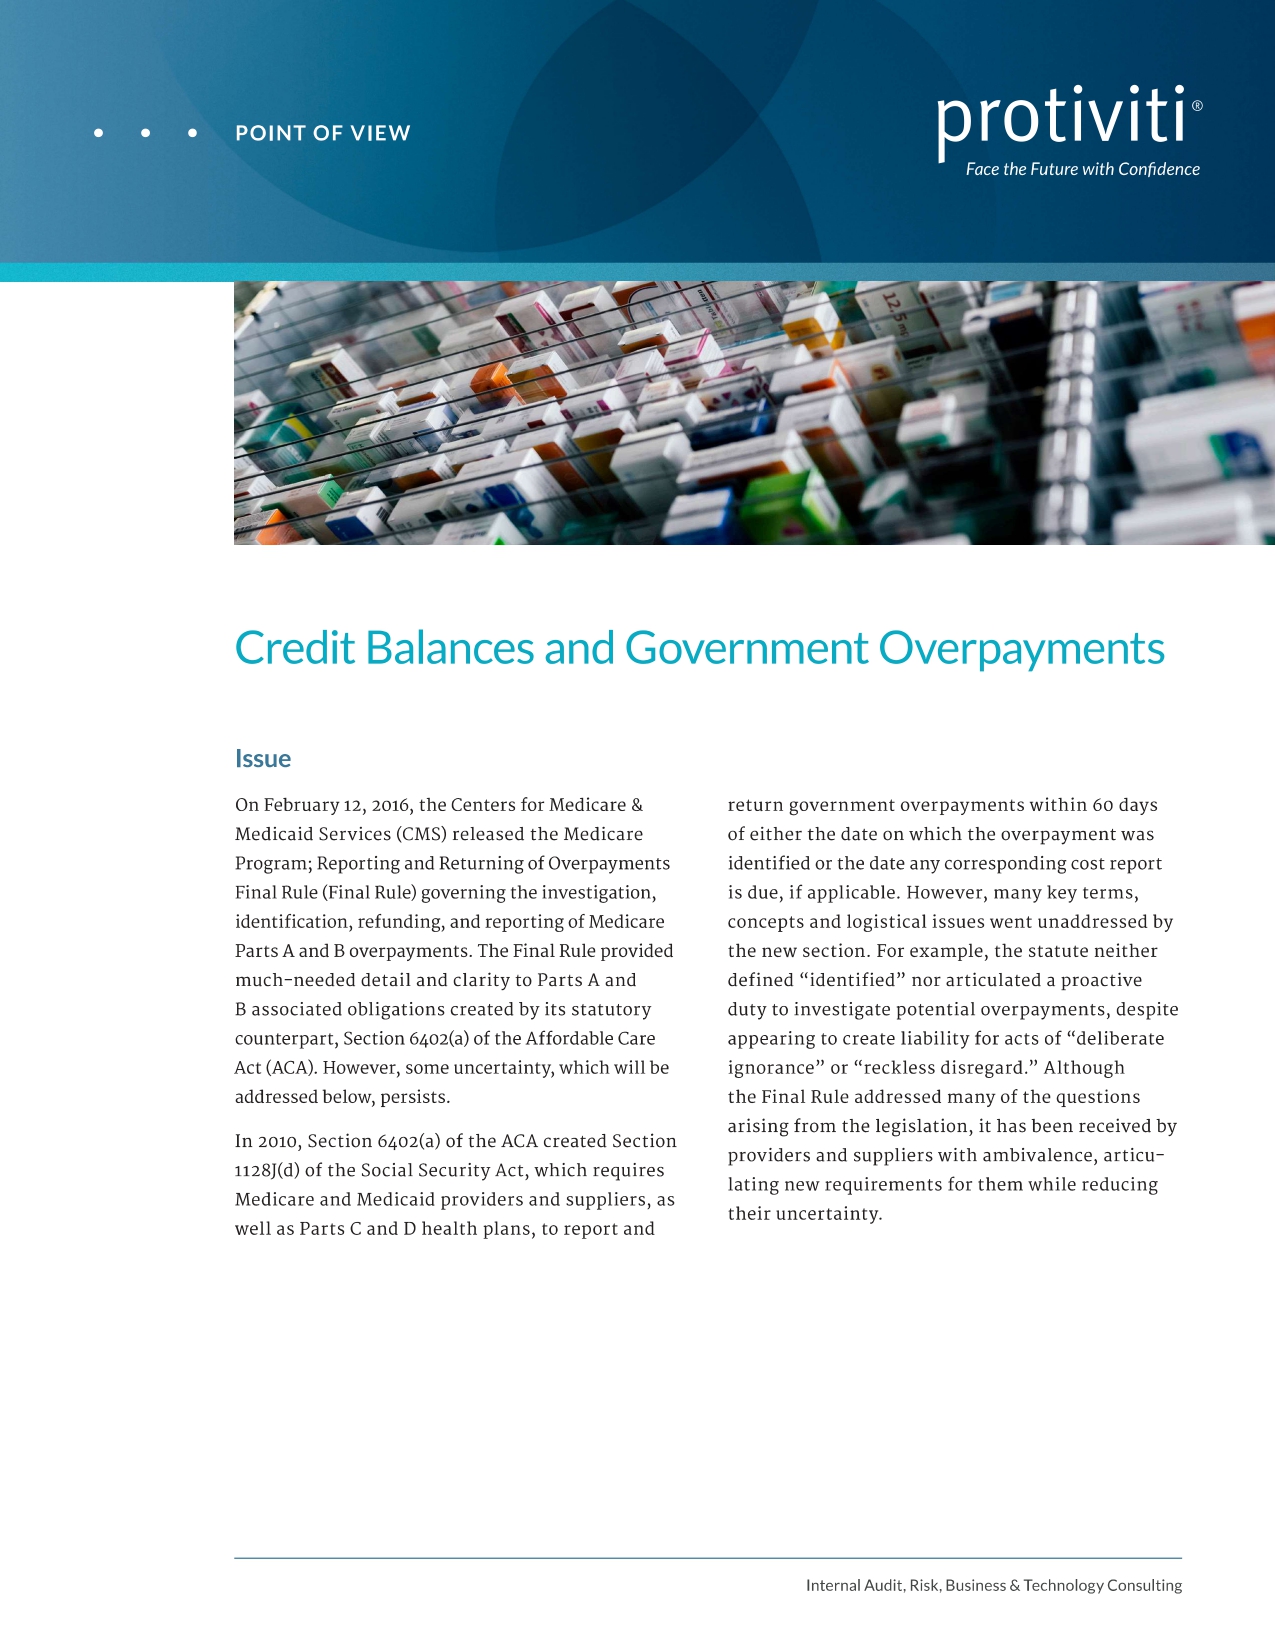 Screenshot of the first page of Credit Balances and Government Overpayments